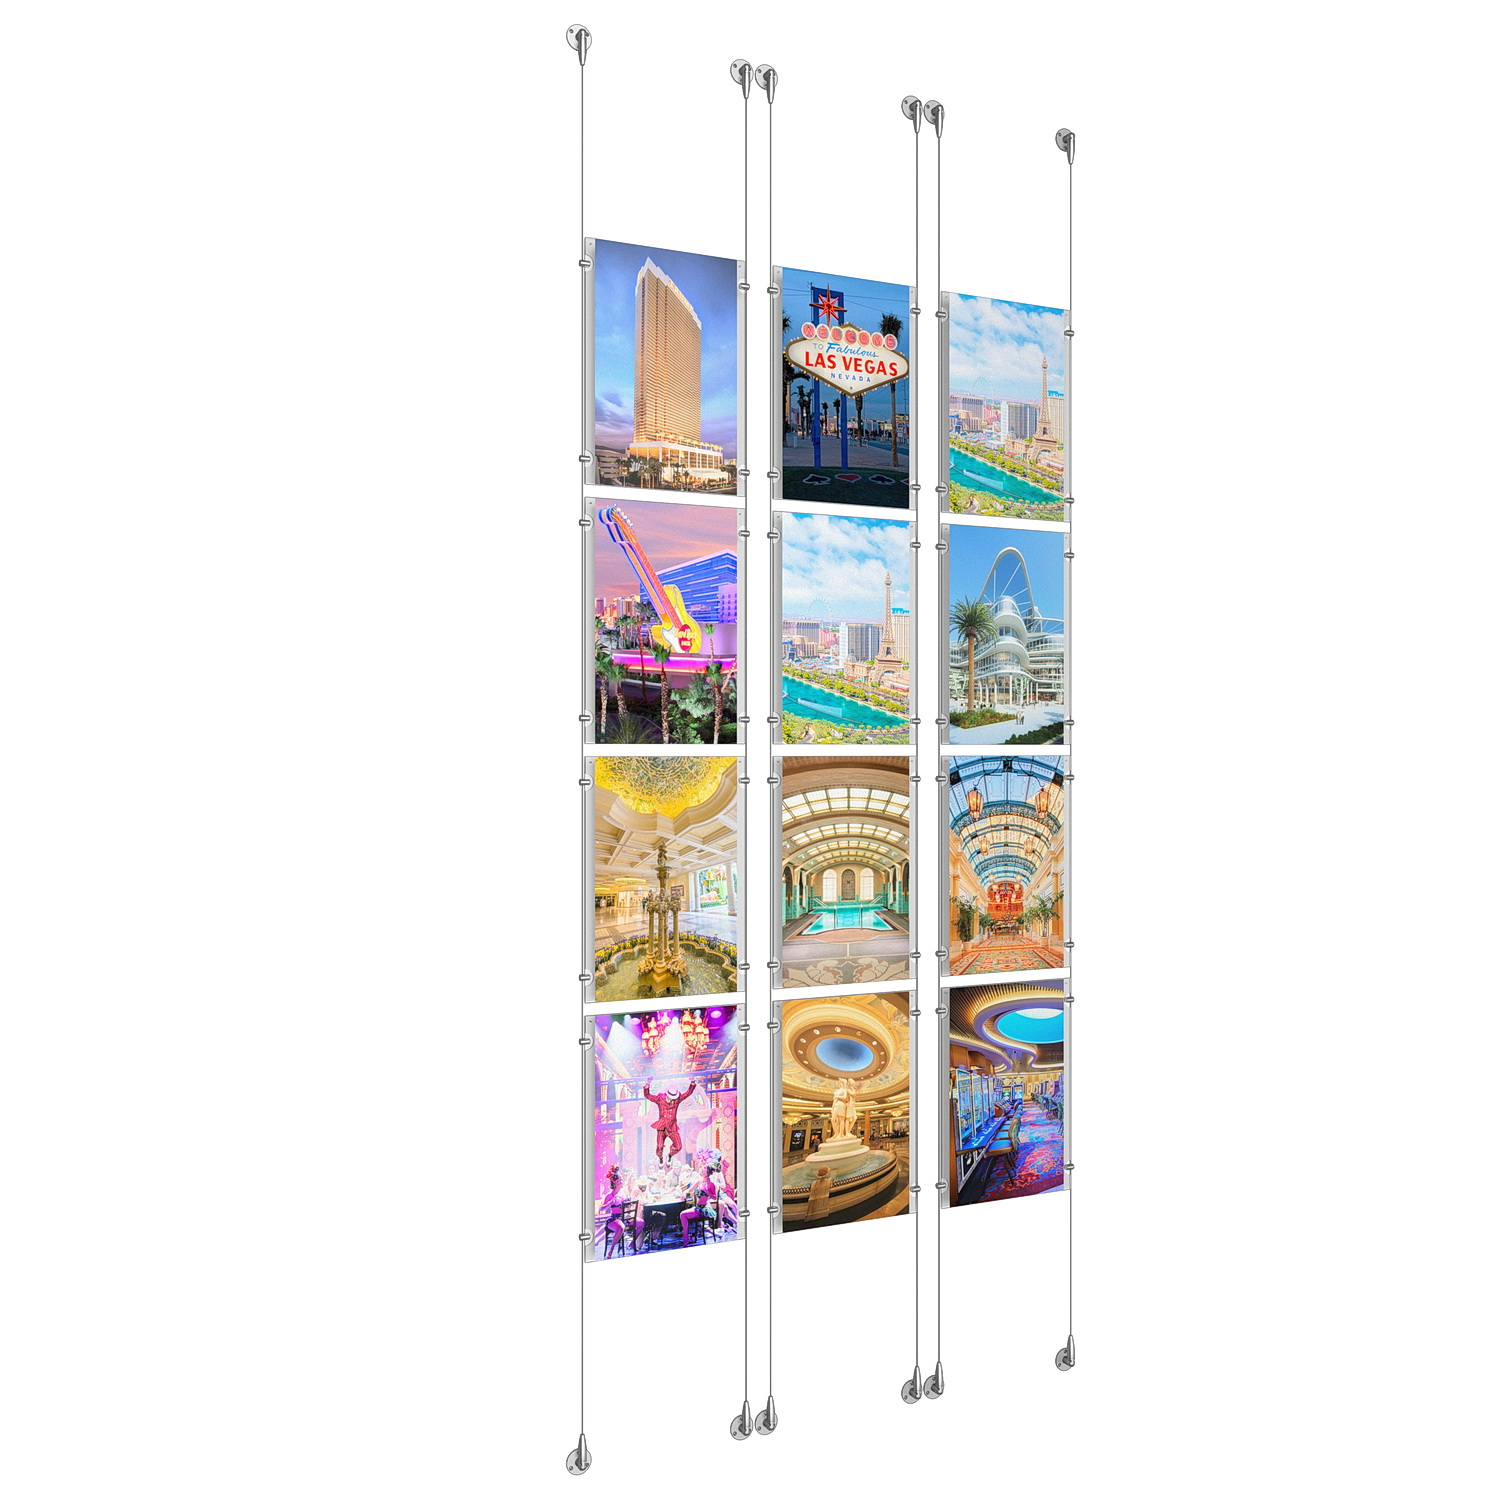 (12) 11'' Width x 17'' Height Clear Acrylic Frame & (6) Aluminum Clear Anodized Adjustable Angle Signature Cable Systems with (48) Single-Sided Panel Grippers